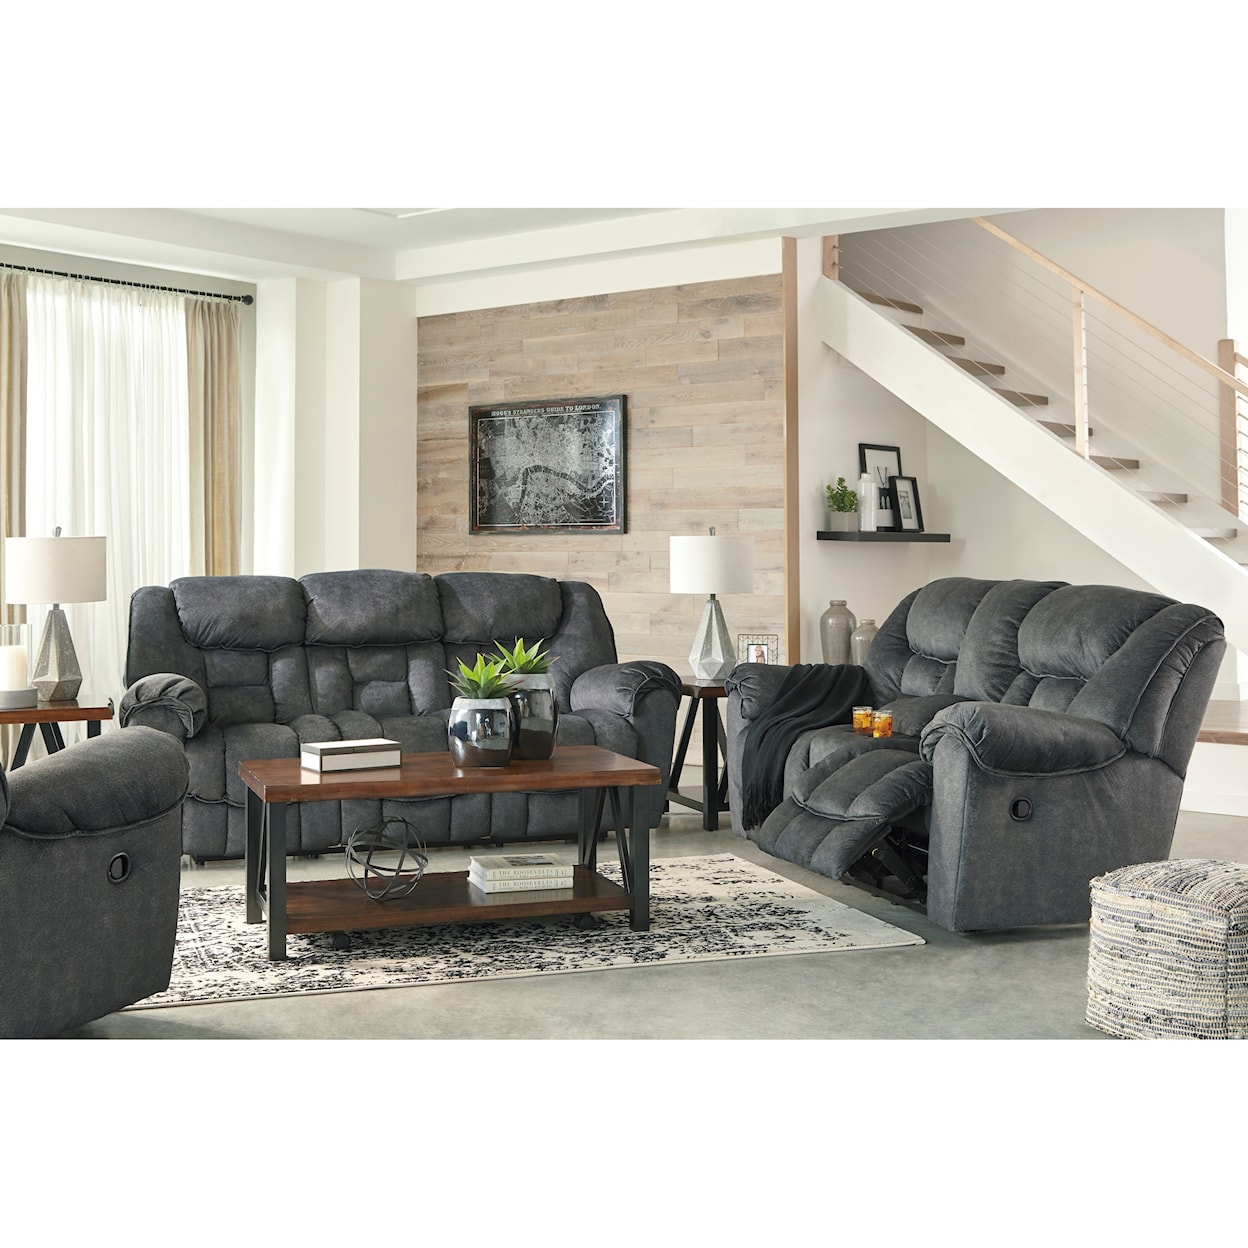 Michael Alan Select Capehorn Reclining Living Room Group